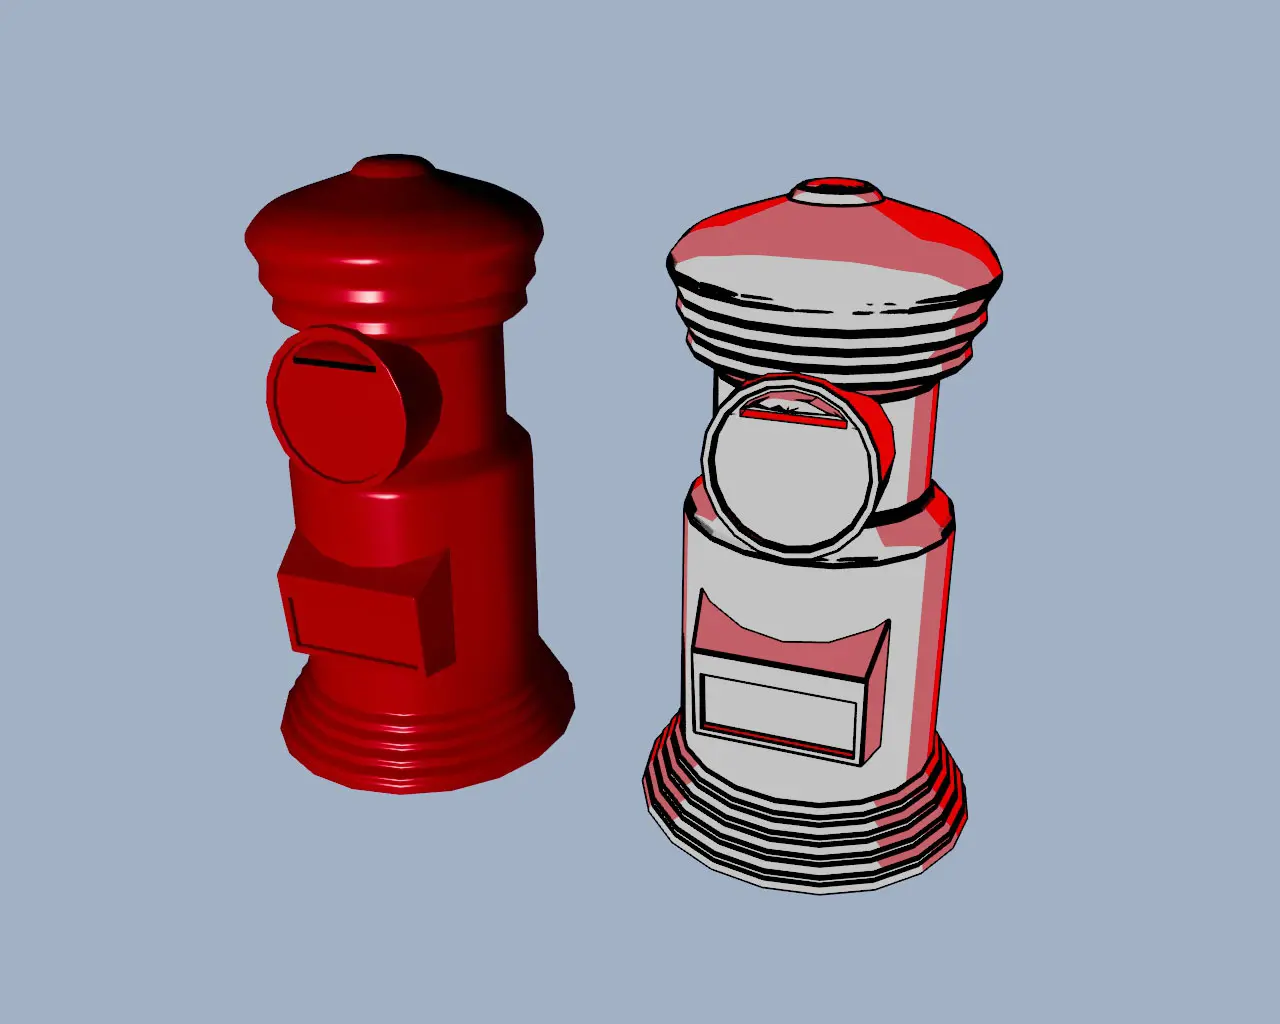 The example of the rendering result.